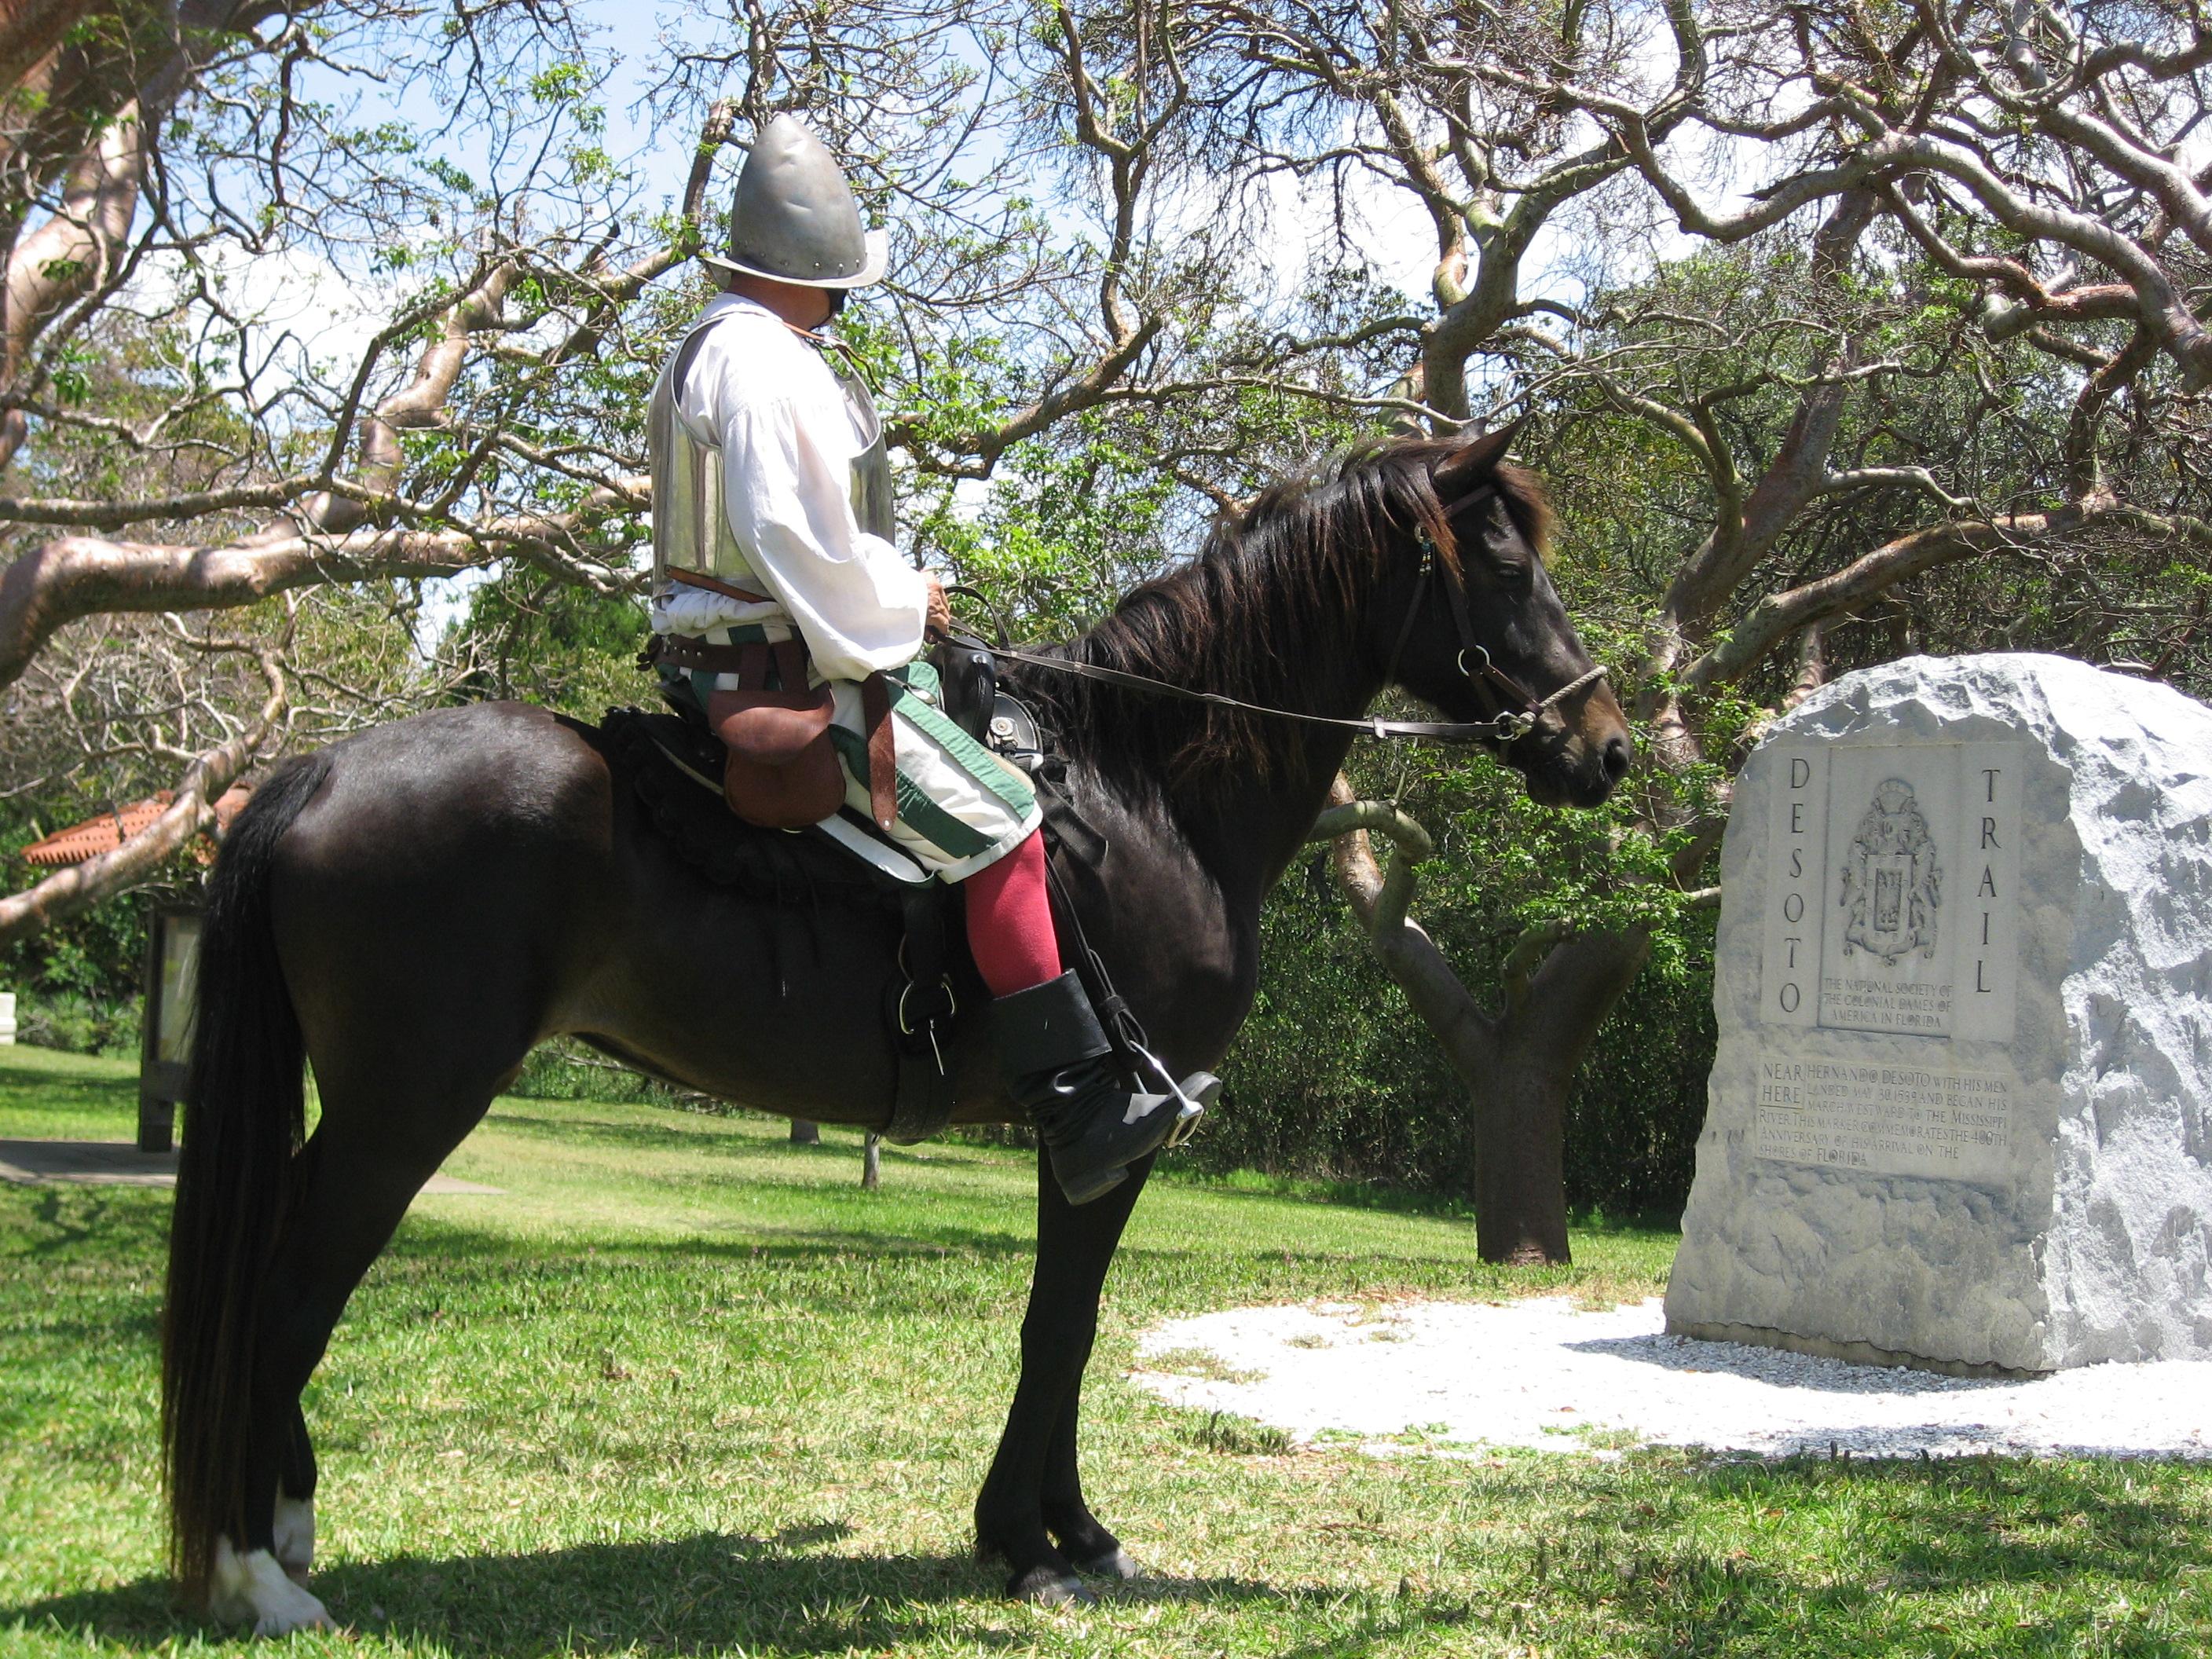 Reenactor Bill Boston on his horse Dixie in front of the De Soto Monument.